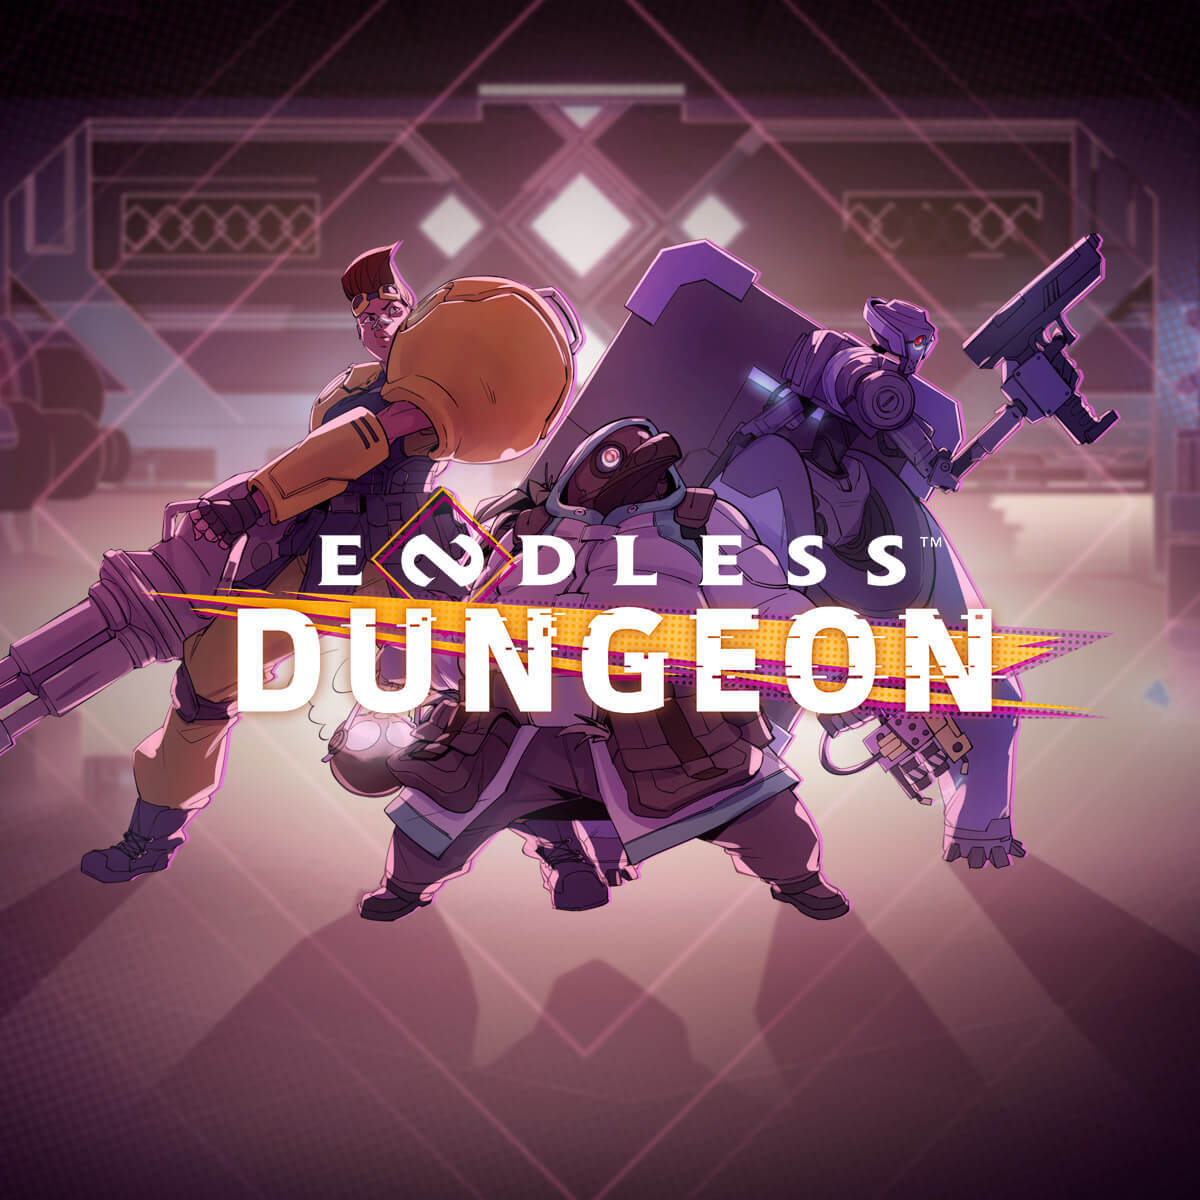 Endless Dungeon is being delayed and won’t be released until October